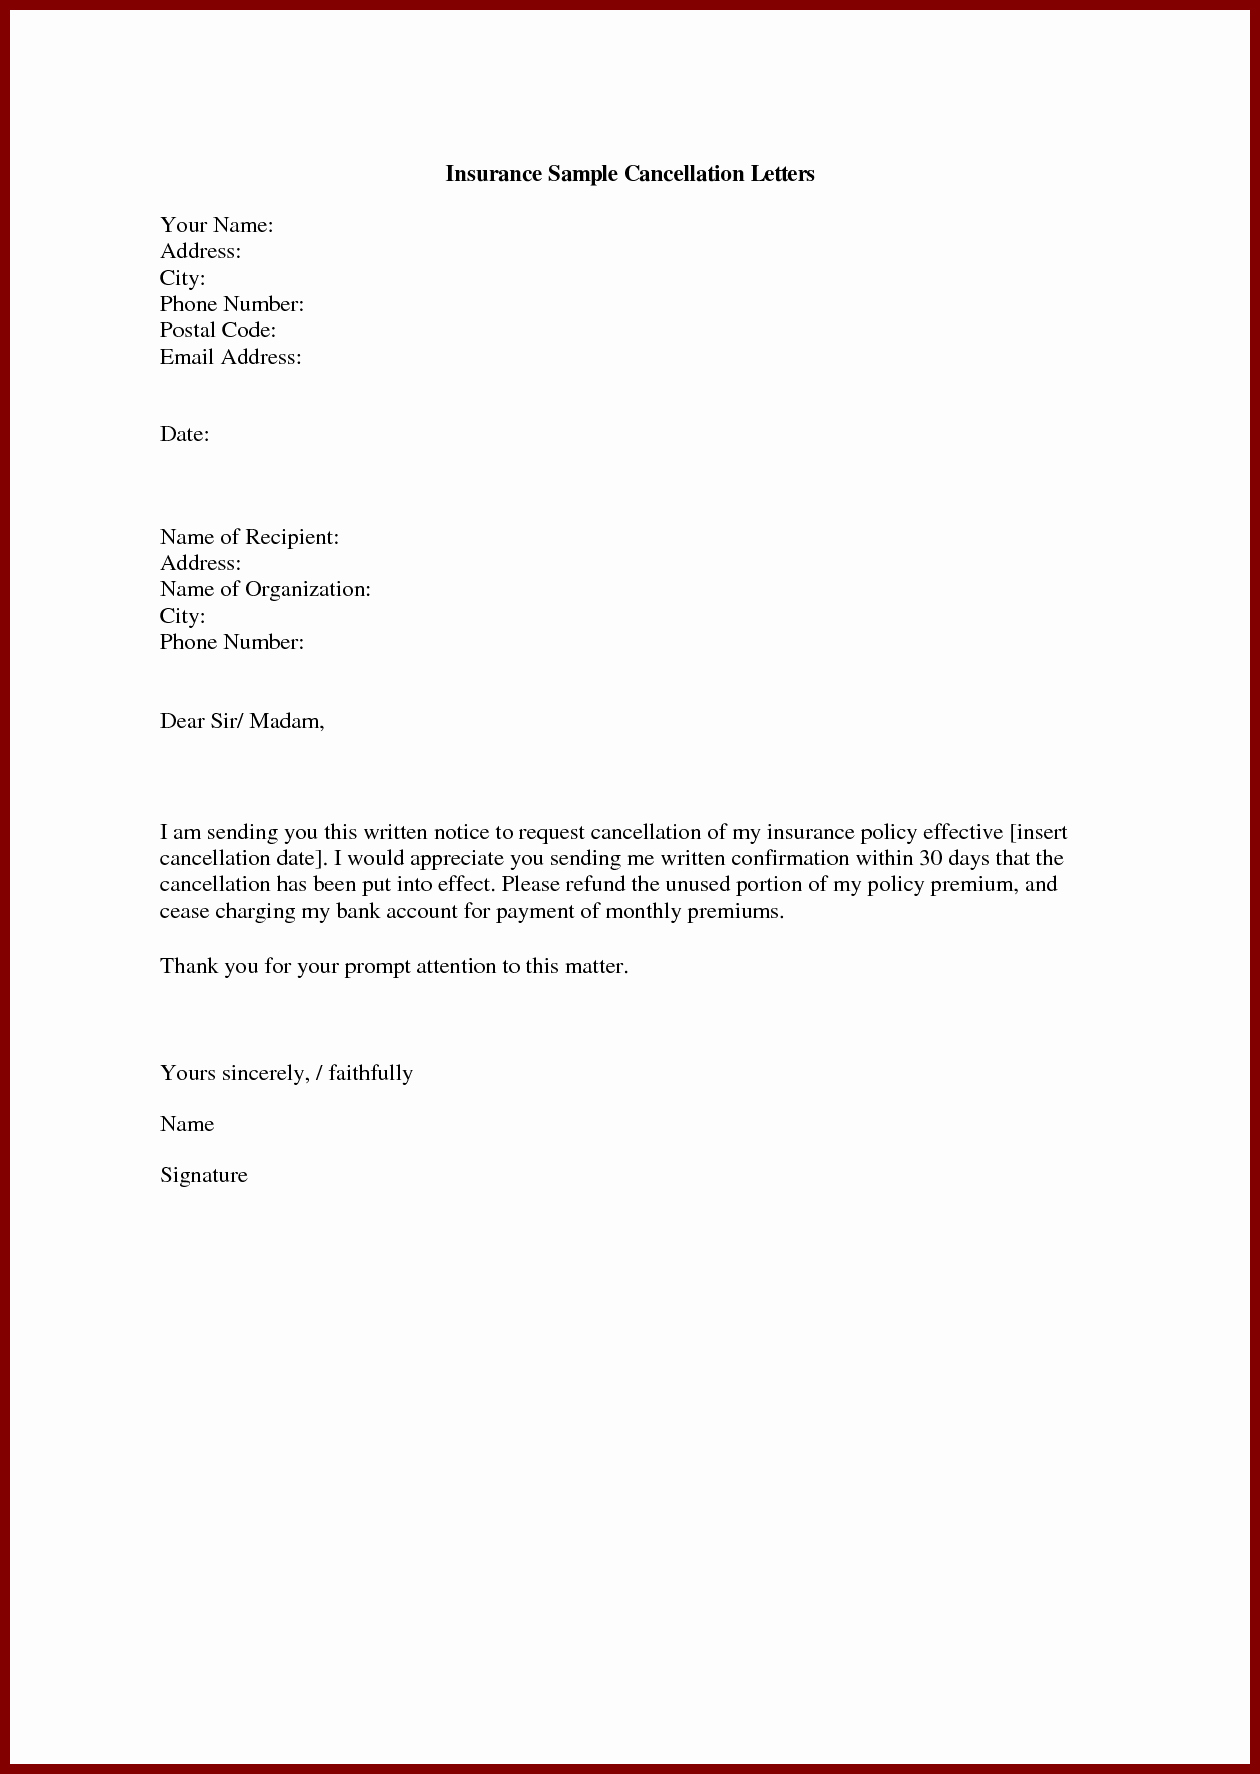 Insurance Policy Cancellation Letter Template - Life Insurance Policy Template Unique Letter to Cancel Insurance